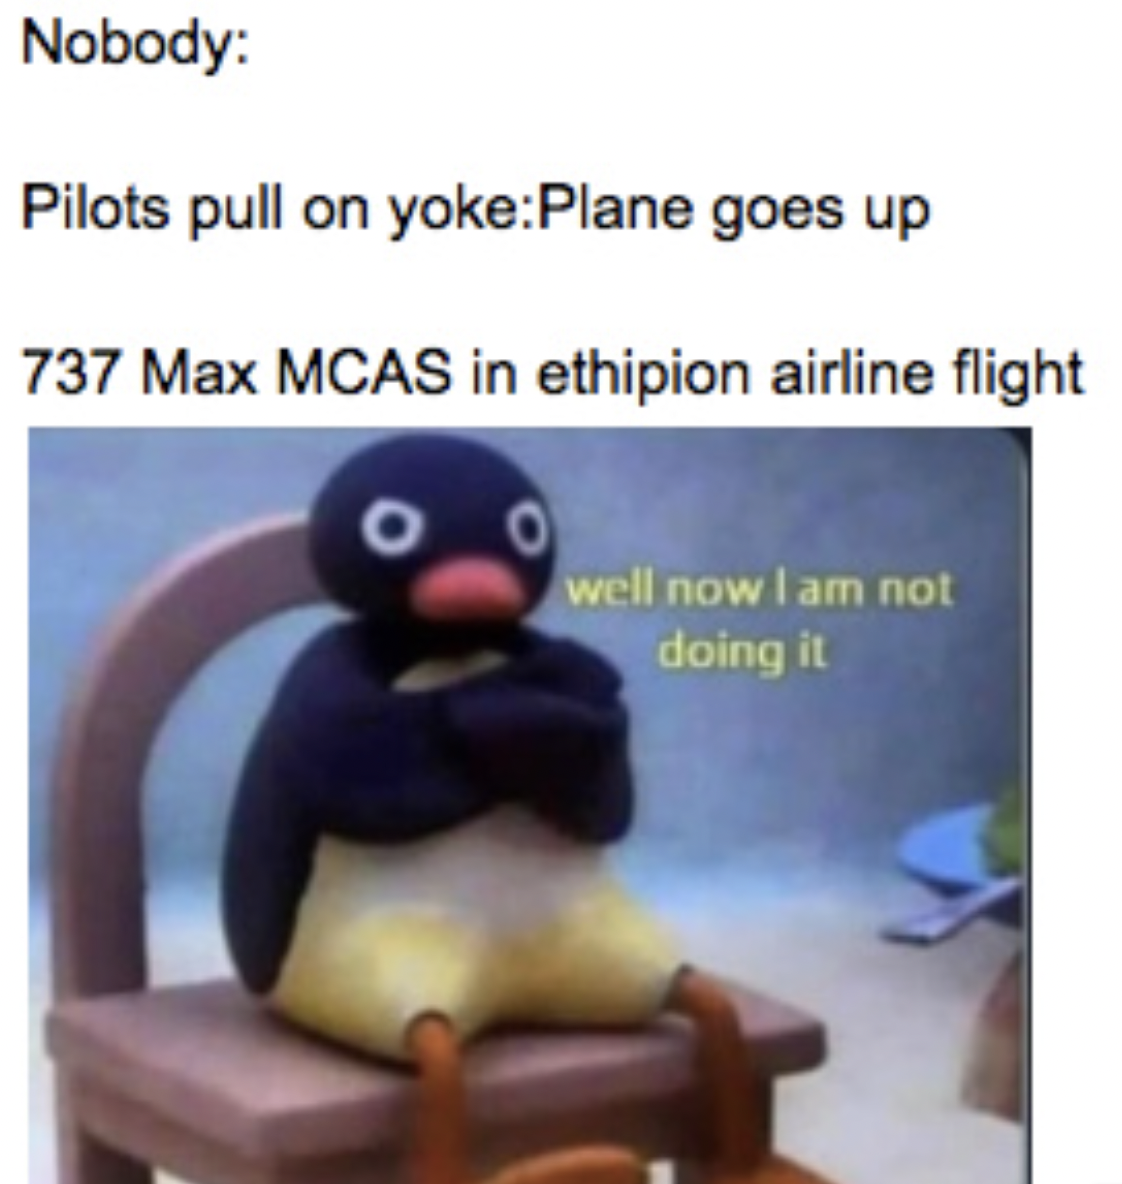 penguin - Nobody Pilots pull on yokePlane goes up 737 Max Mcas in ethipion airline flight well now I am not doing it